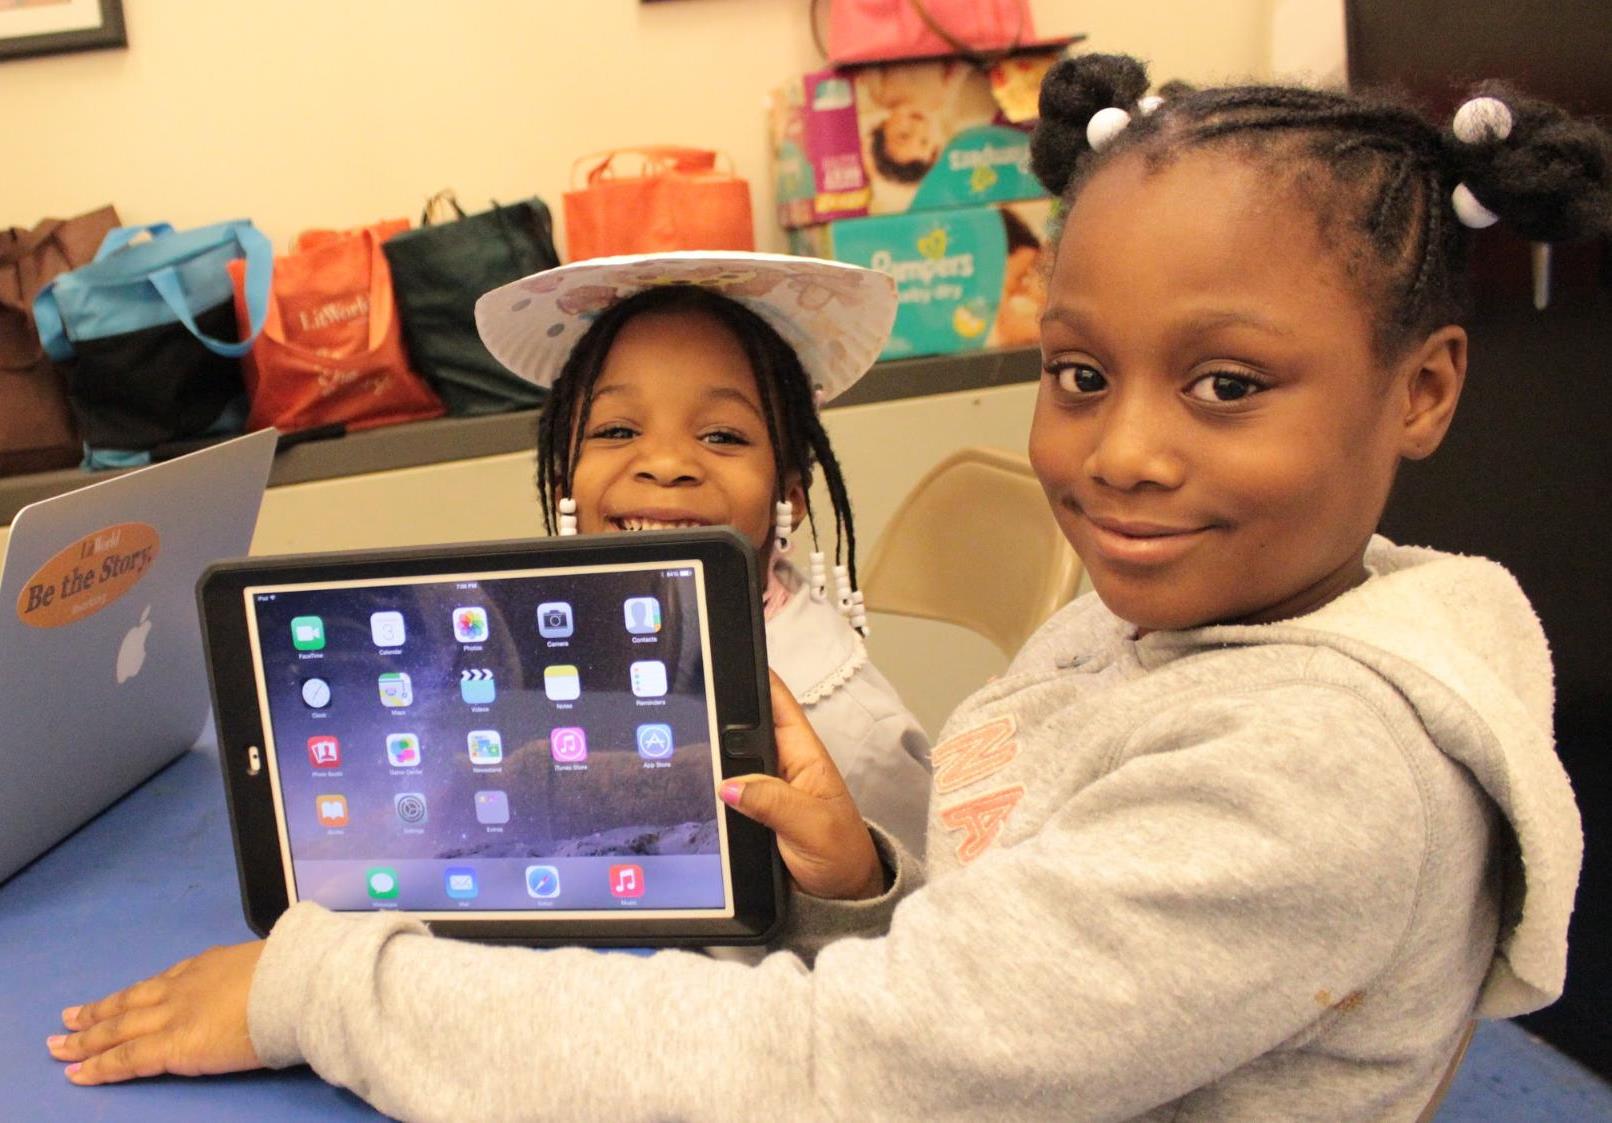 The family fun with iPads will last all summer long!